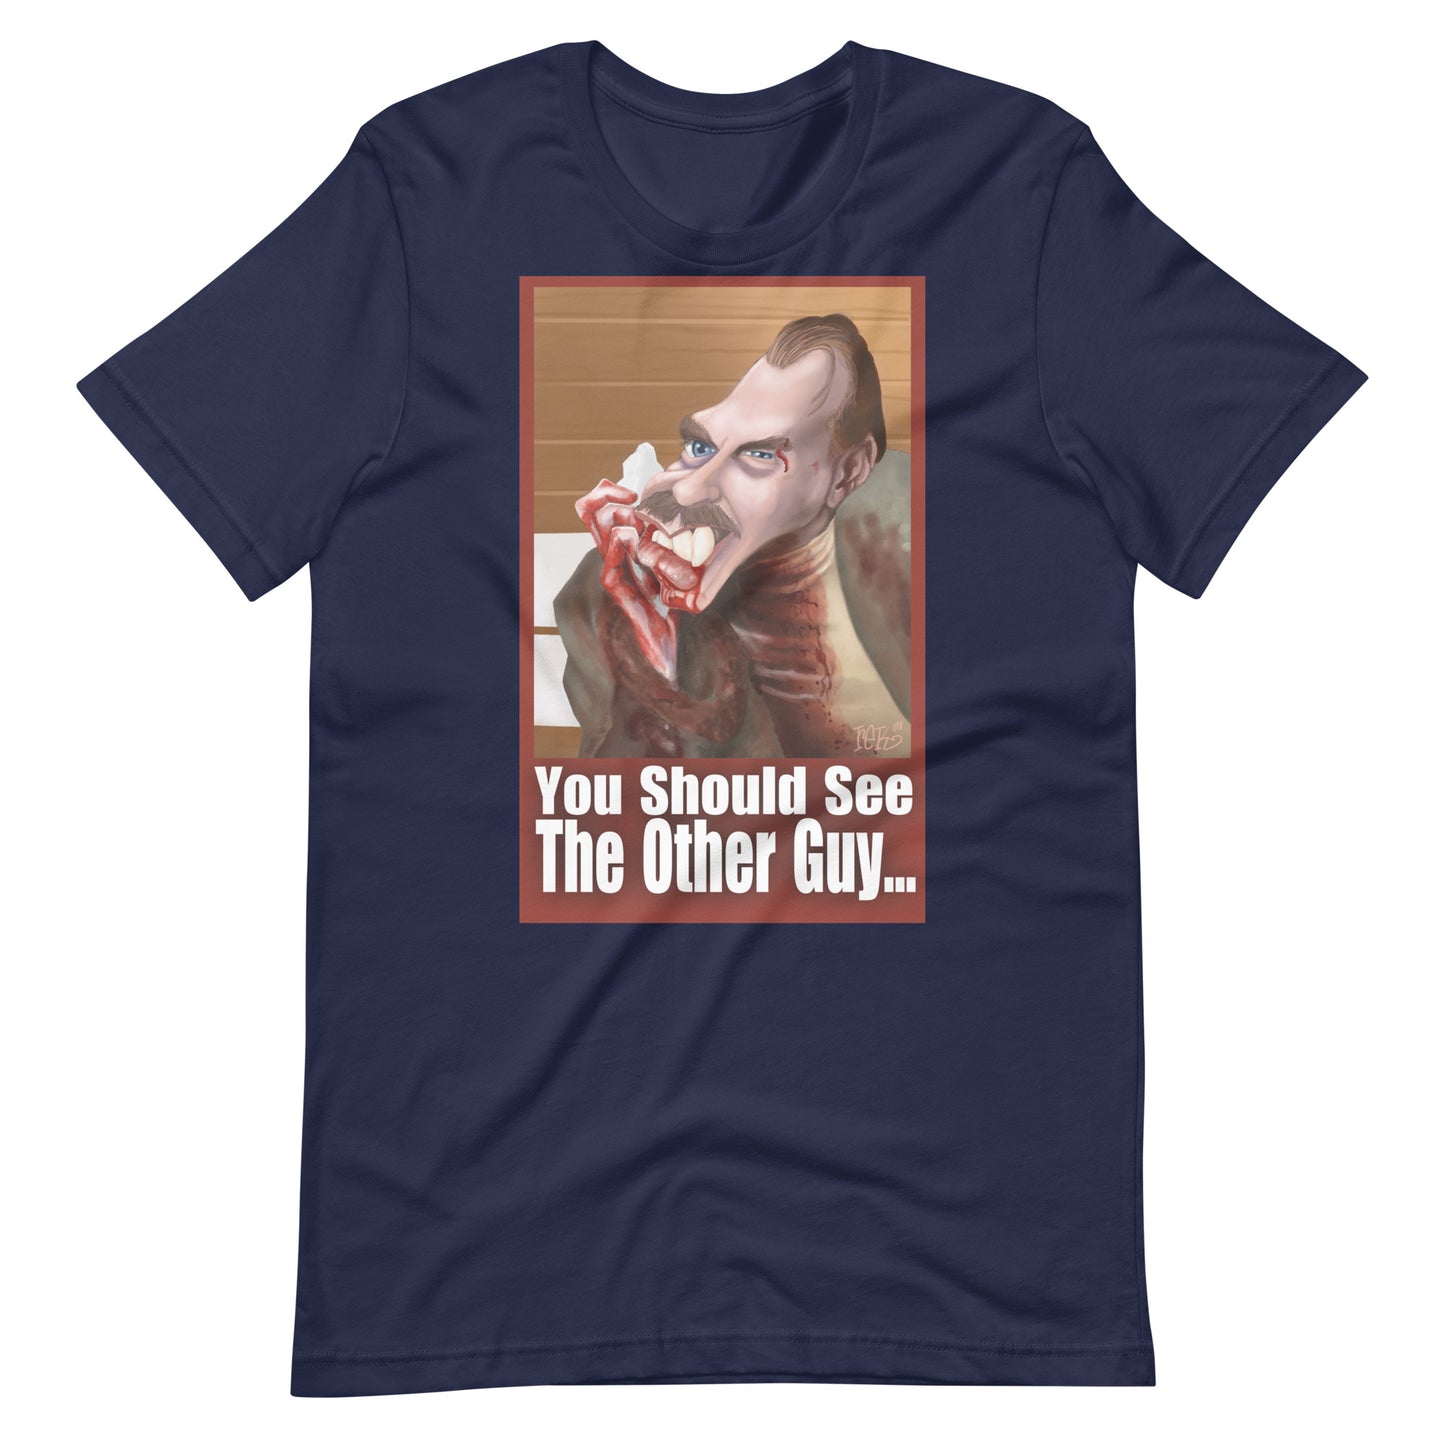 You Should See The Other Guy T-shirt